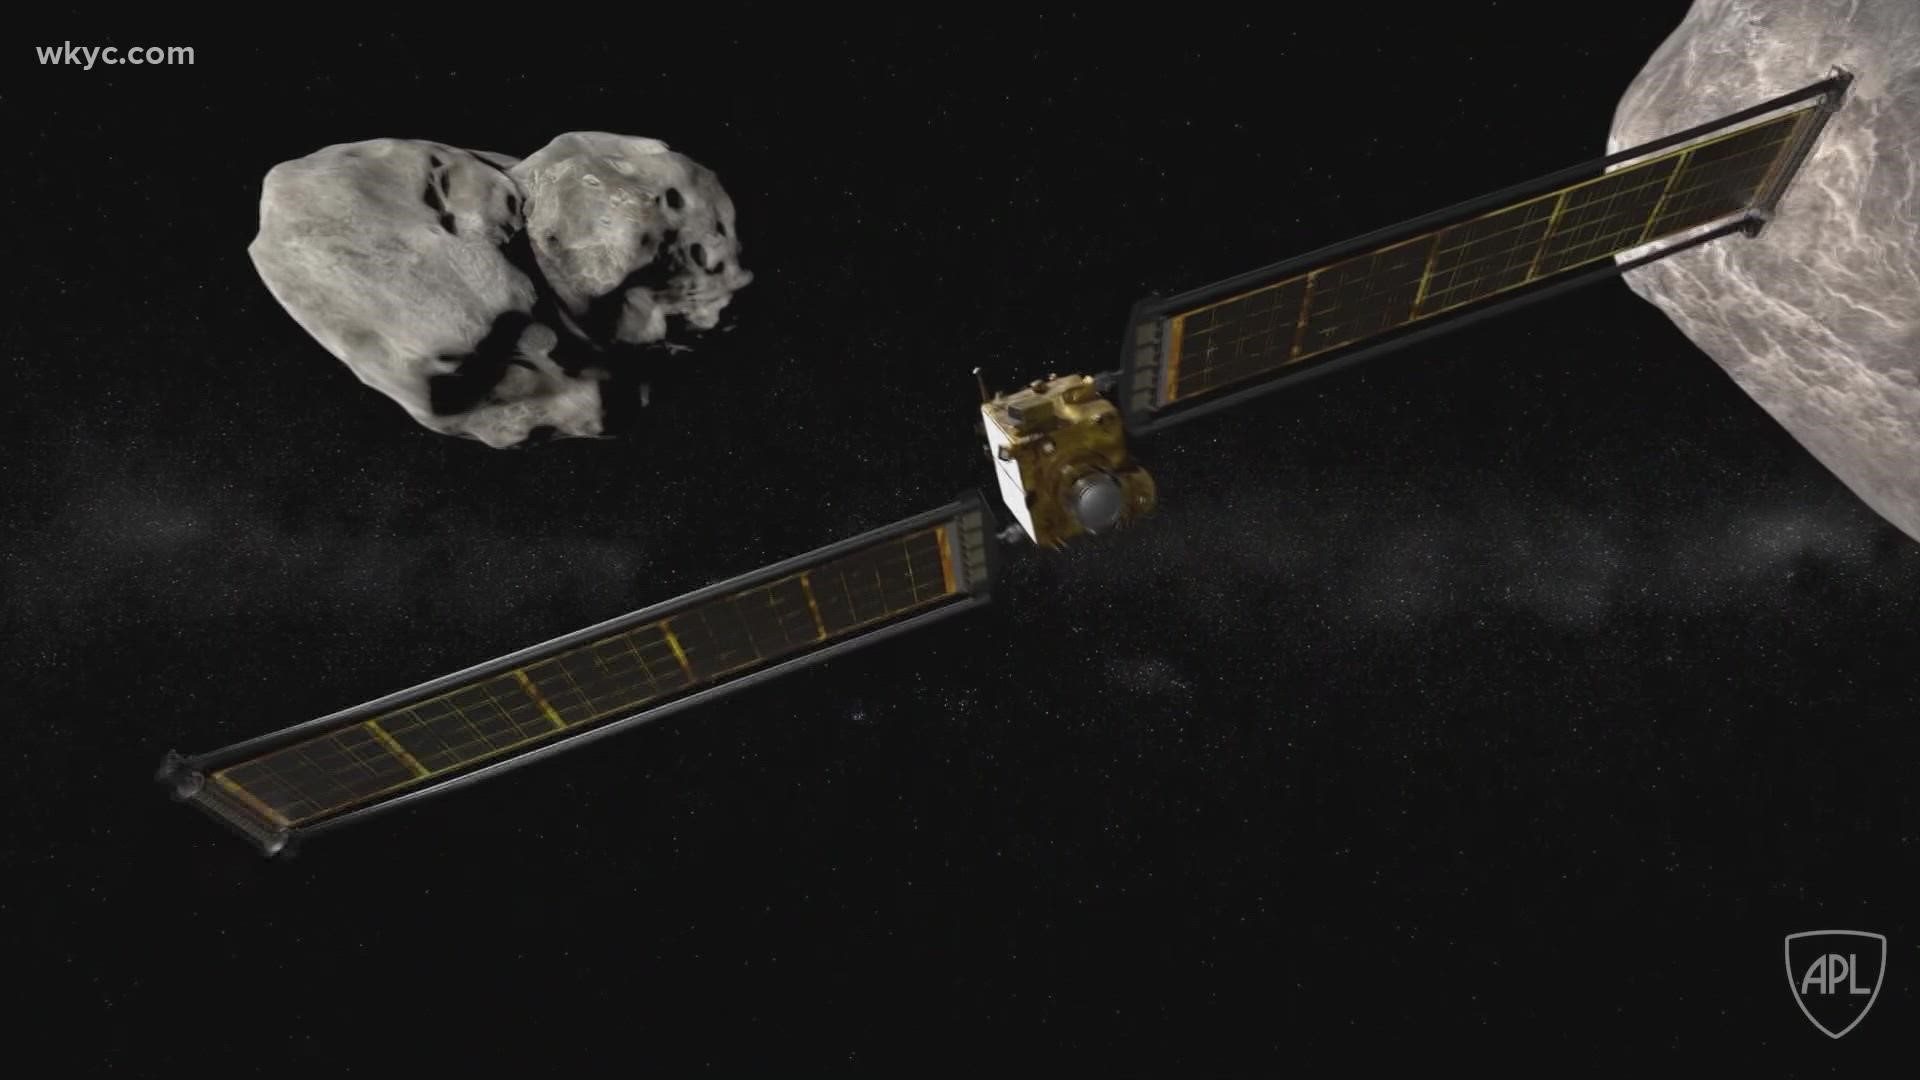 Ever wondered how NASA plans to get rid of an asteroid that is getting a little too close for comfort? There's a plan for that! Lynna Lai reports.